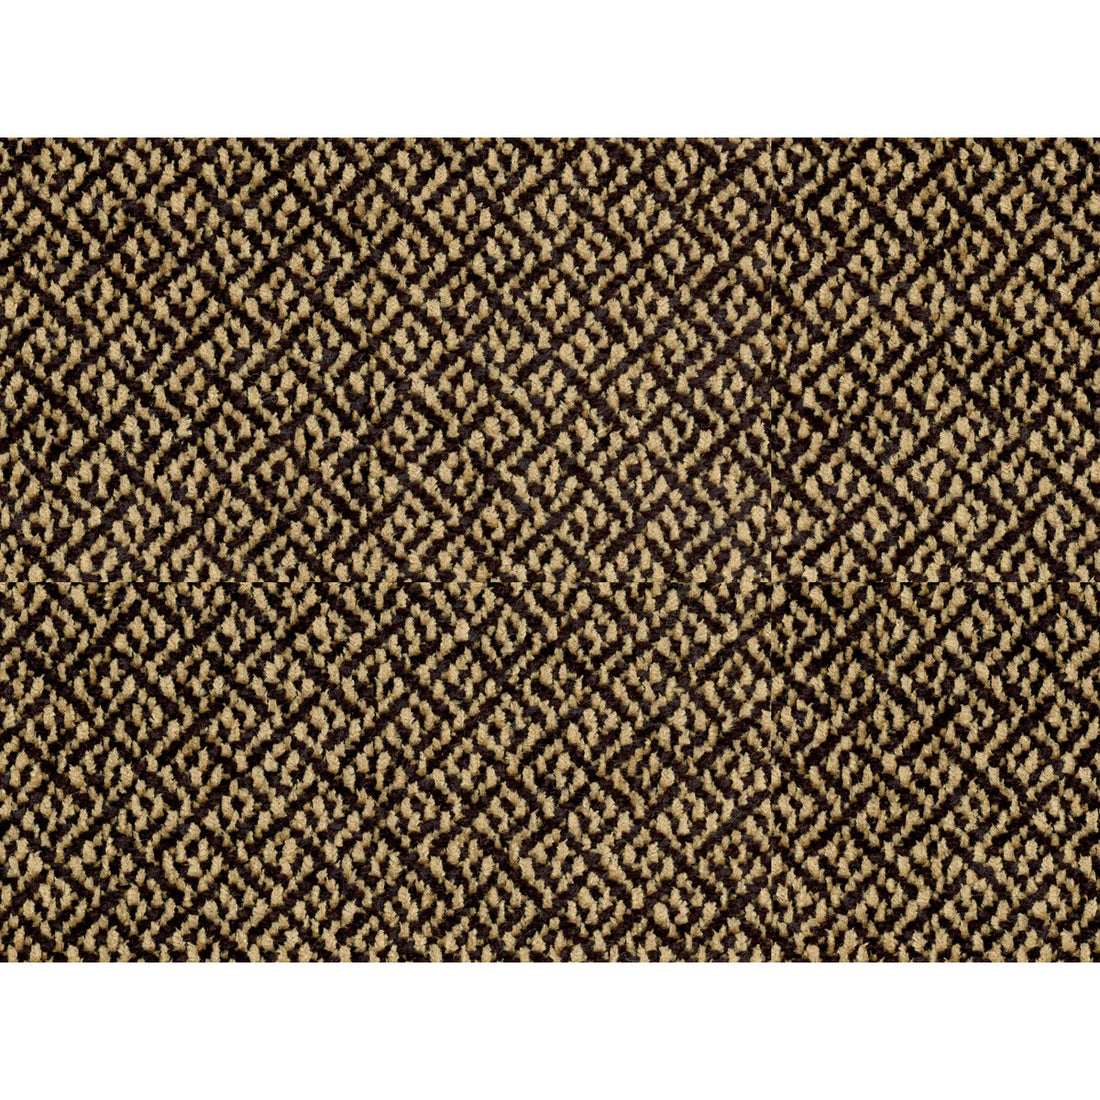 Cottian Chenille fabric in ebony color - pattern 8016110.8.0 - by Brunschwig &amp; Fils in the Chambery Textures collection